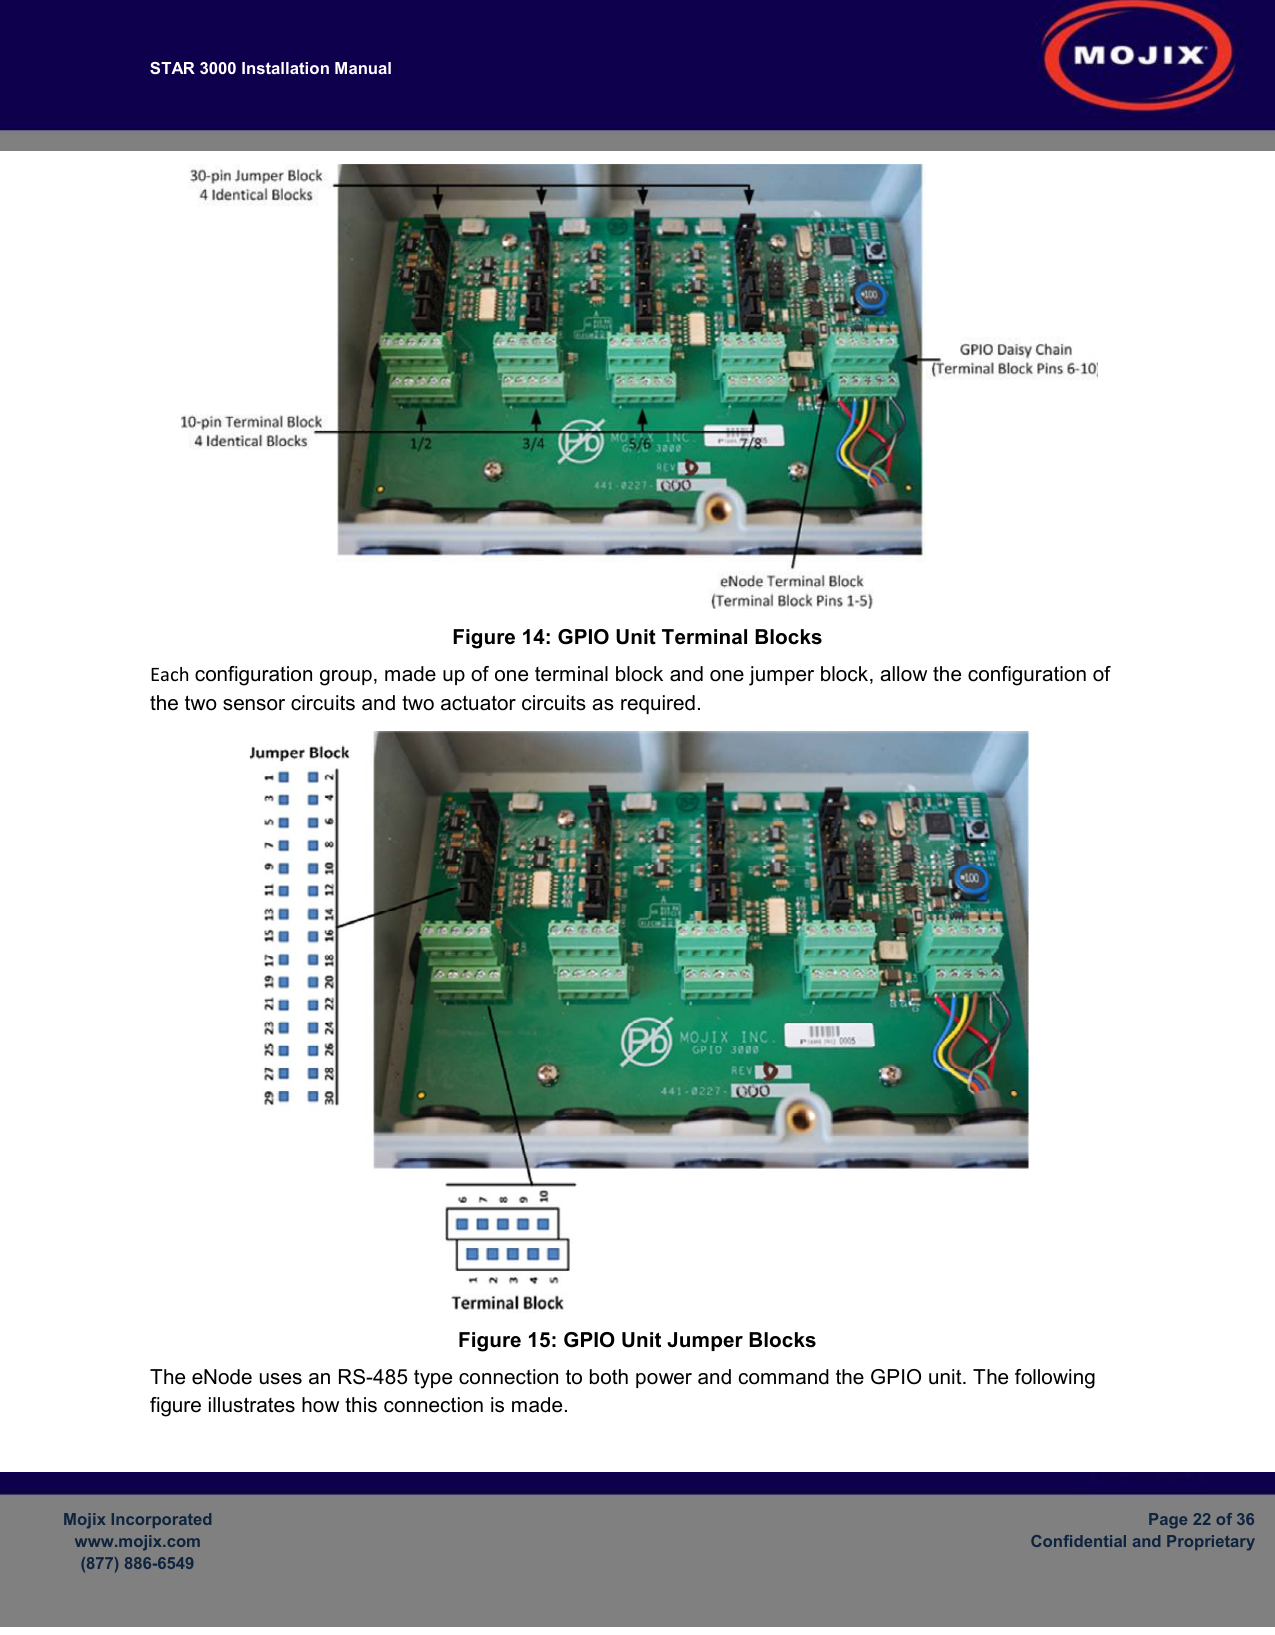 STAR 3000 Installation Manual         Mojix Incorporated www.mojix.com (877) 886-6549  Page 22 of 36 Confidential and Proprietary   Figure 14: GPIO Unit Terminal Blocks Each configuration group, made up of one terminal block and one jumper block, allow the configuration of the two sensor circuits and two actuator circuits as required.  Figure 15: GPIO Unit Jumper Blocks The eNode uses an RS-485 type connection to both power and command the GPIO unit. The following figure illustrates how this connection is made. 